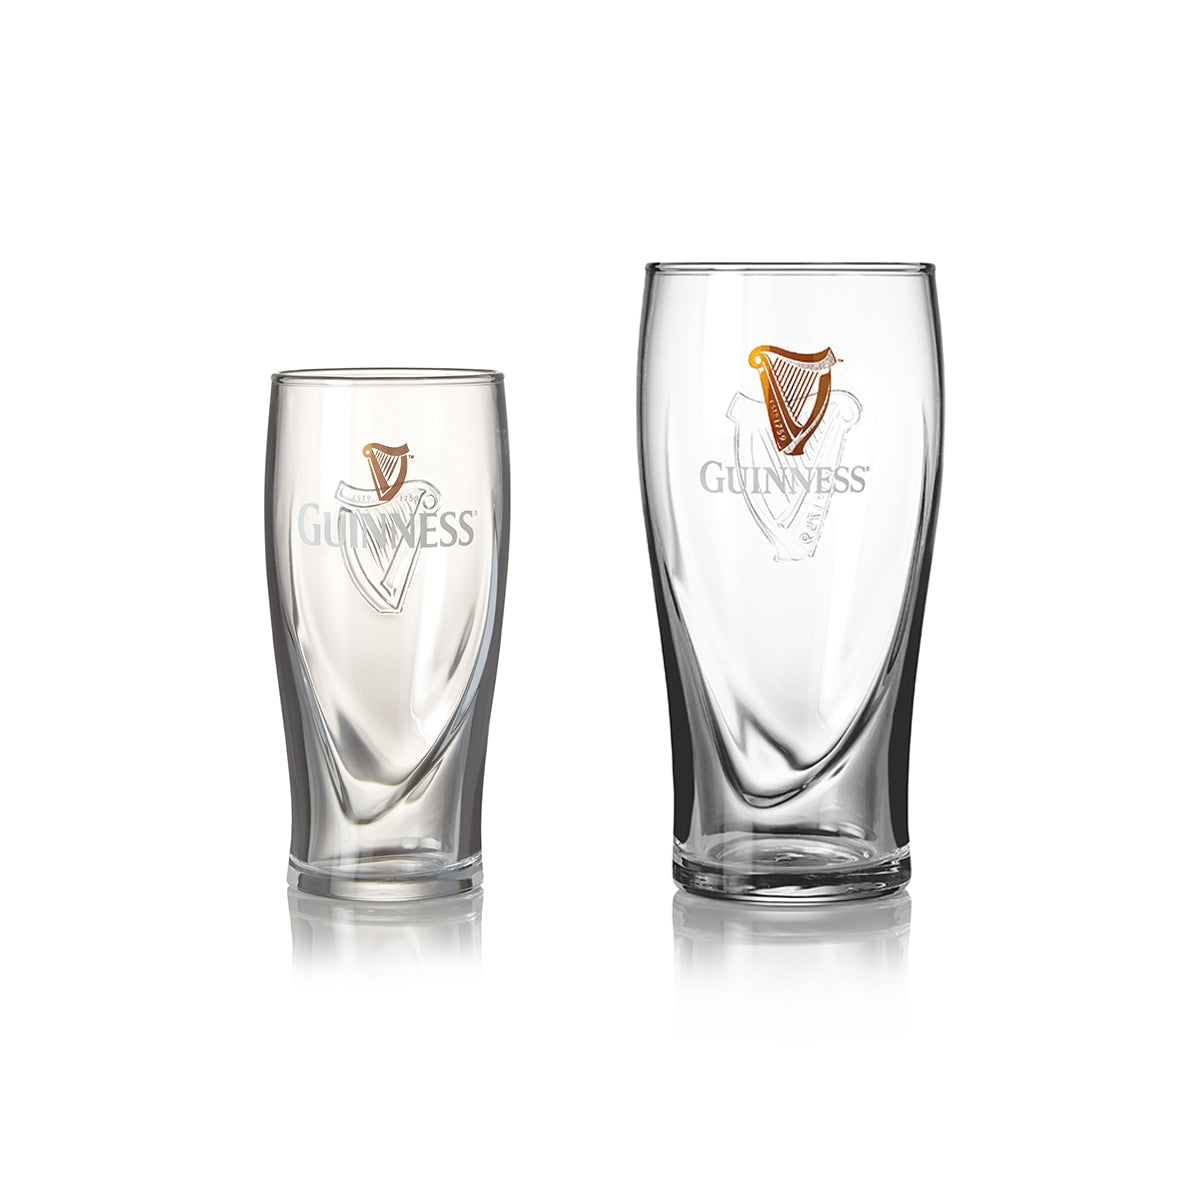 Two Guinness Half Pint Glass 4 Packs on a white surface.